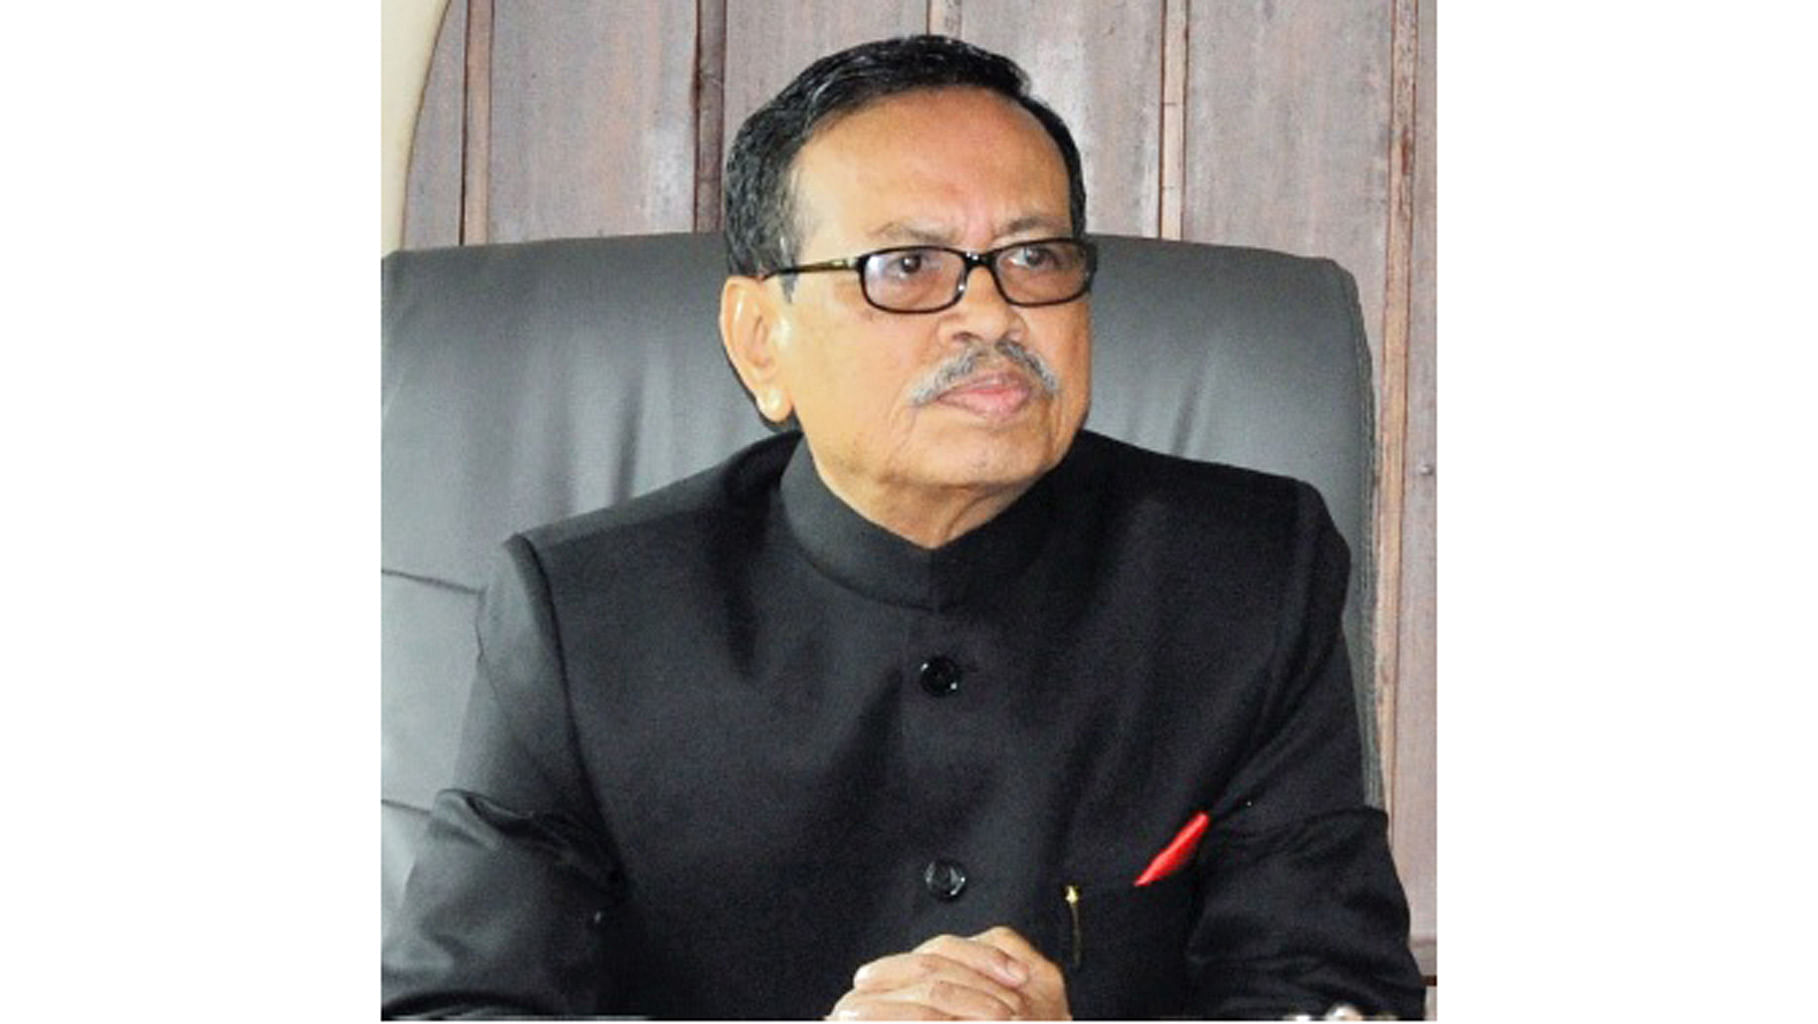  Governor Jyoti Prasad Rajkhowa submitted a report on the political situation of Arunachal Pradesh slamming the current government for violating the constitution of India. (Photo Courtesy: <a href="http://arunachalgovernor.gov.in/html/profile.htm">arunachalgovernor.gov.in</a>)